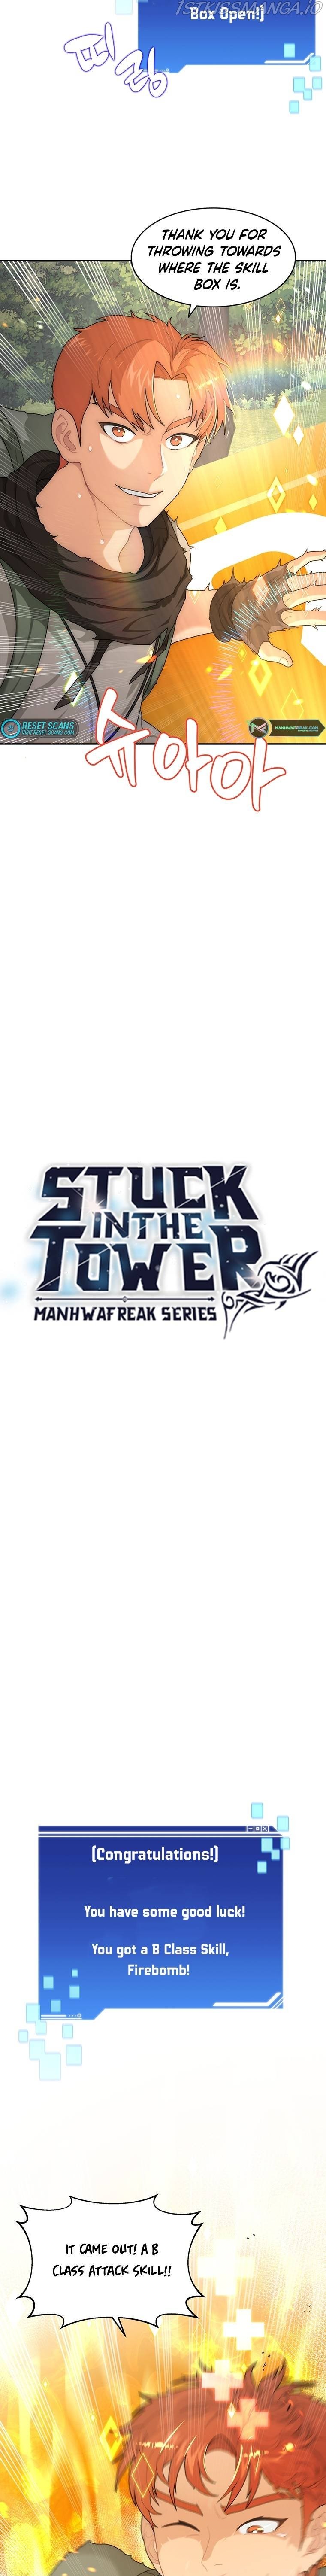 Stuck in the Tower chapter 5